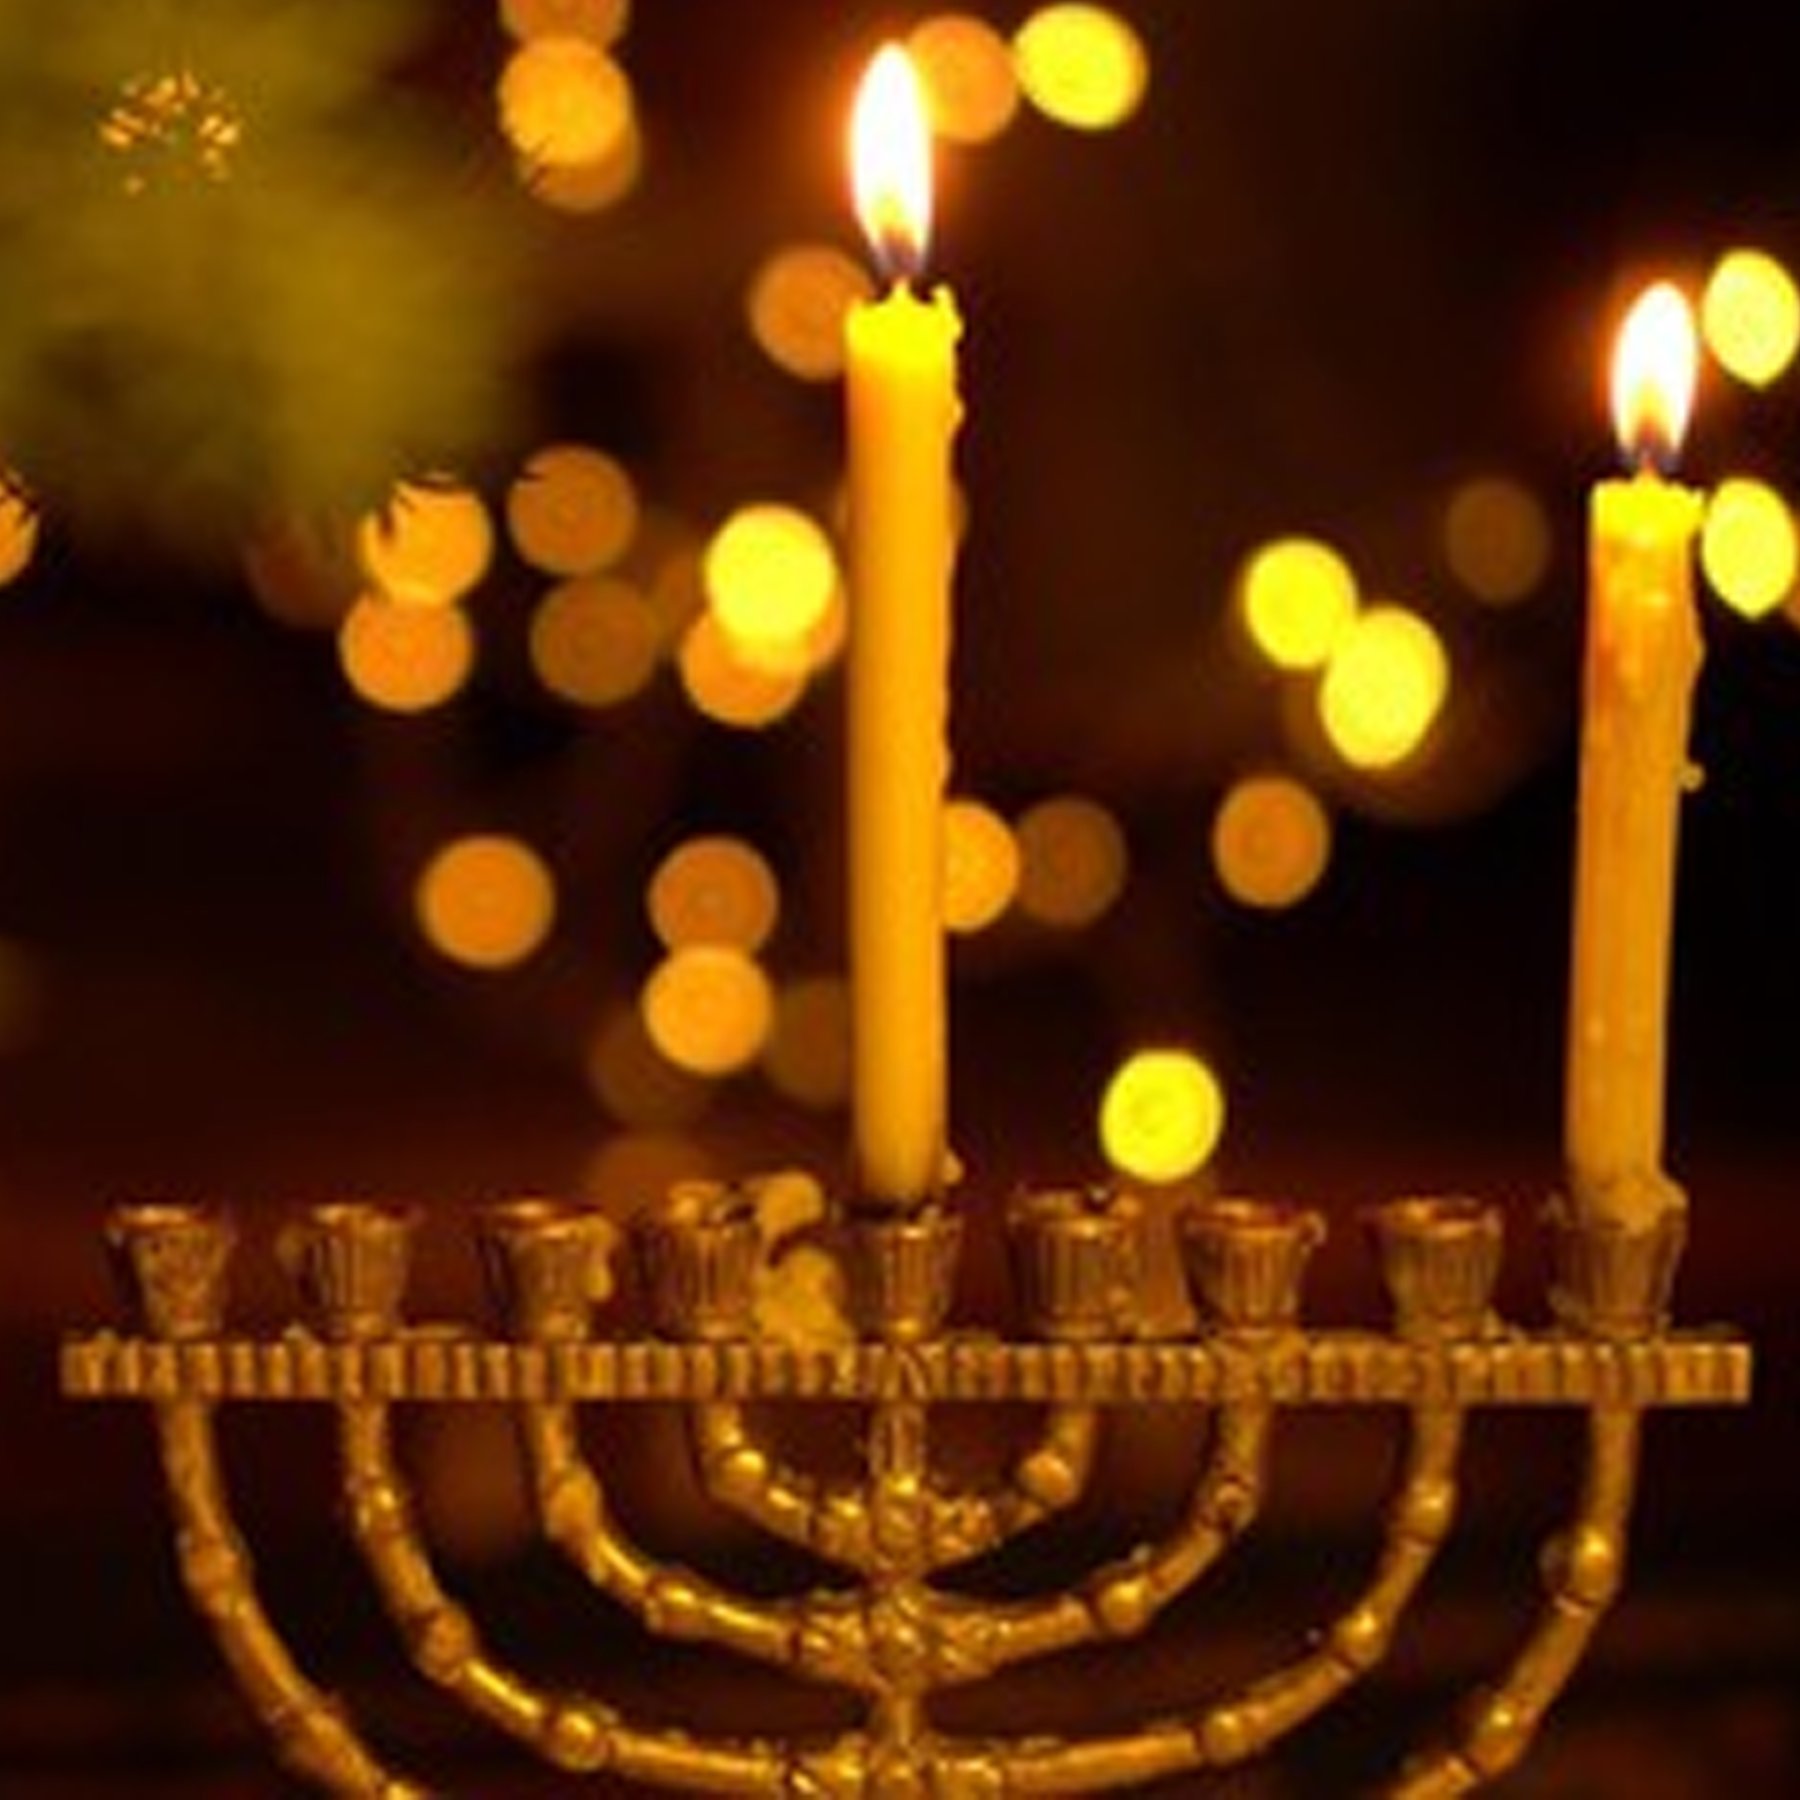 Happy Hanukkah to all those who observe the ancient Jewish Festival of Lights